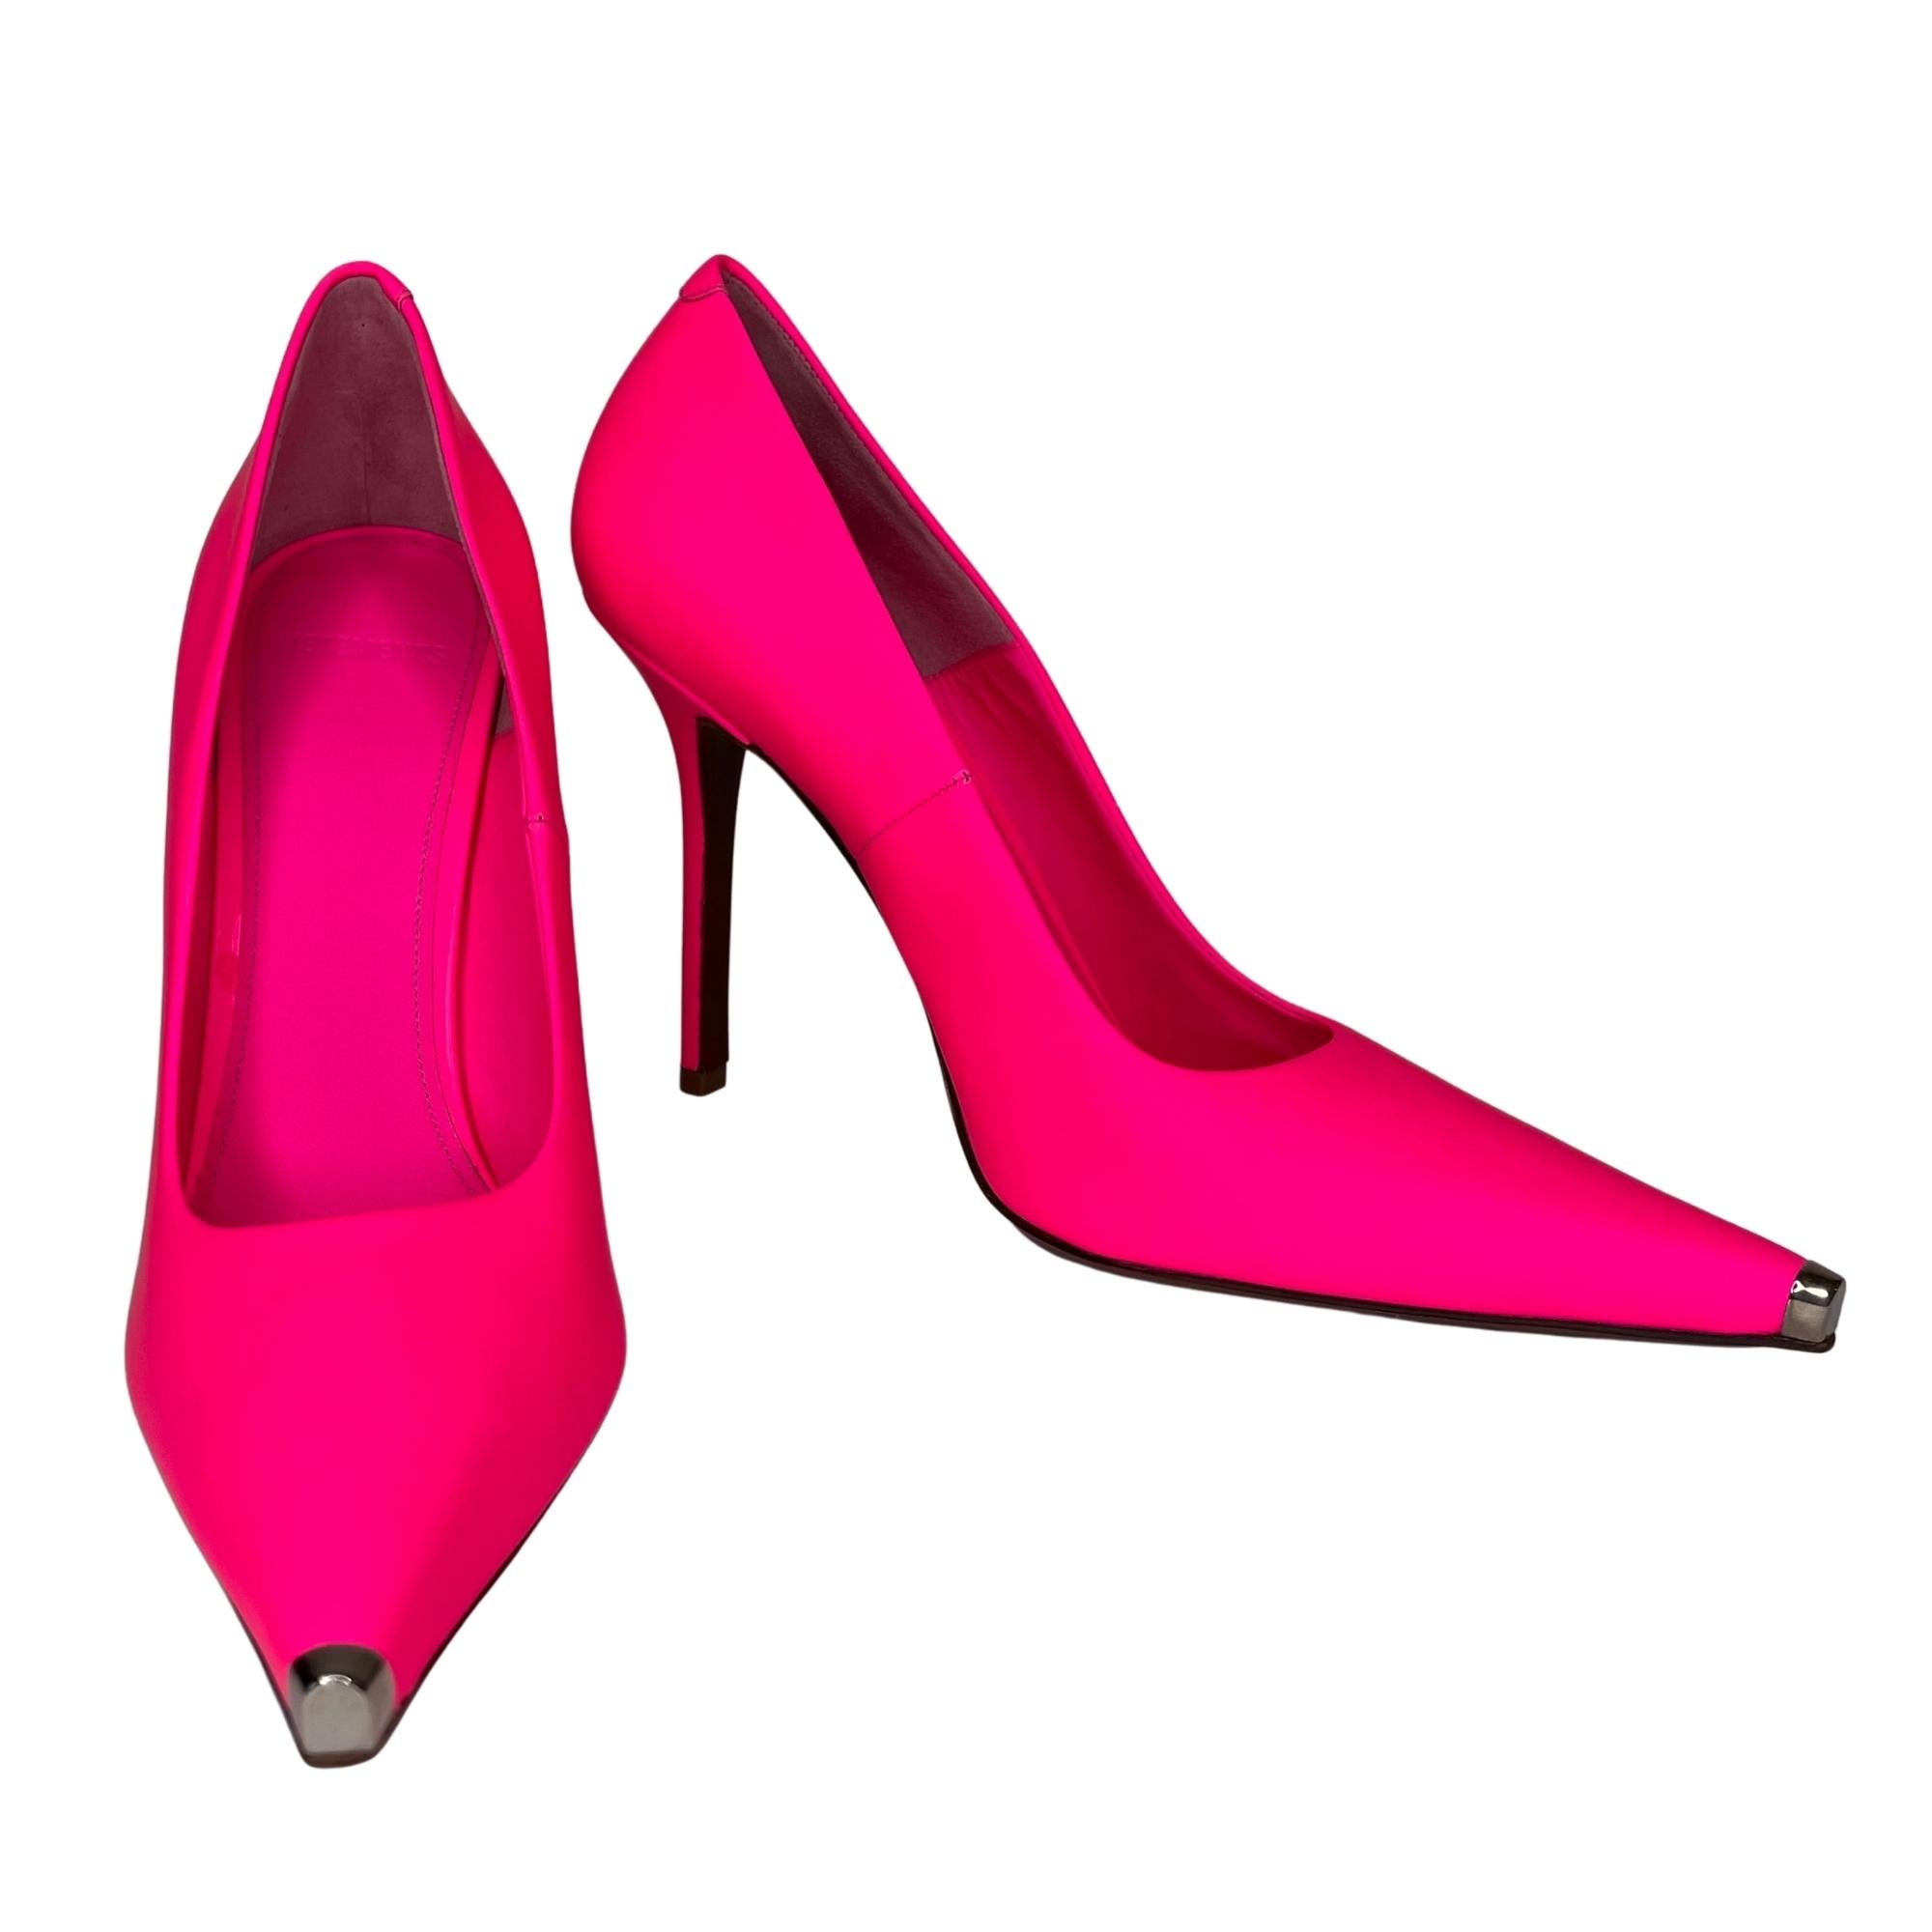 Pink leather 110-mm Décolleté pumps featuring a pointed toe, a slip-on style, a high stiletto heel, a gold-tone cap toe and leather sole and leather lining.
Designer Style ID: SS20HE009

COLOR: Pink
MATERIAL: Rubberized leather
SIZE: 38 EU / 7